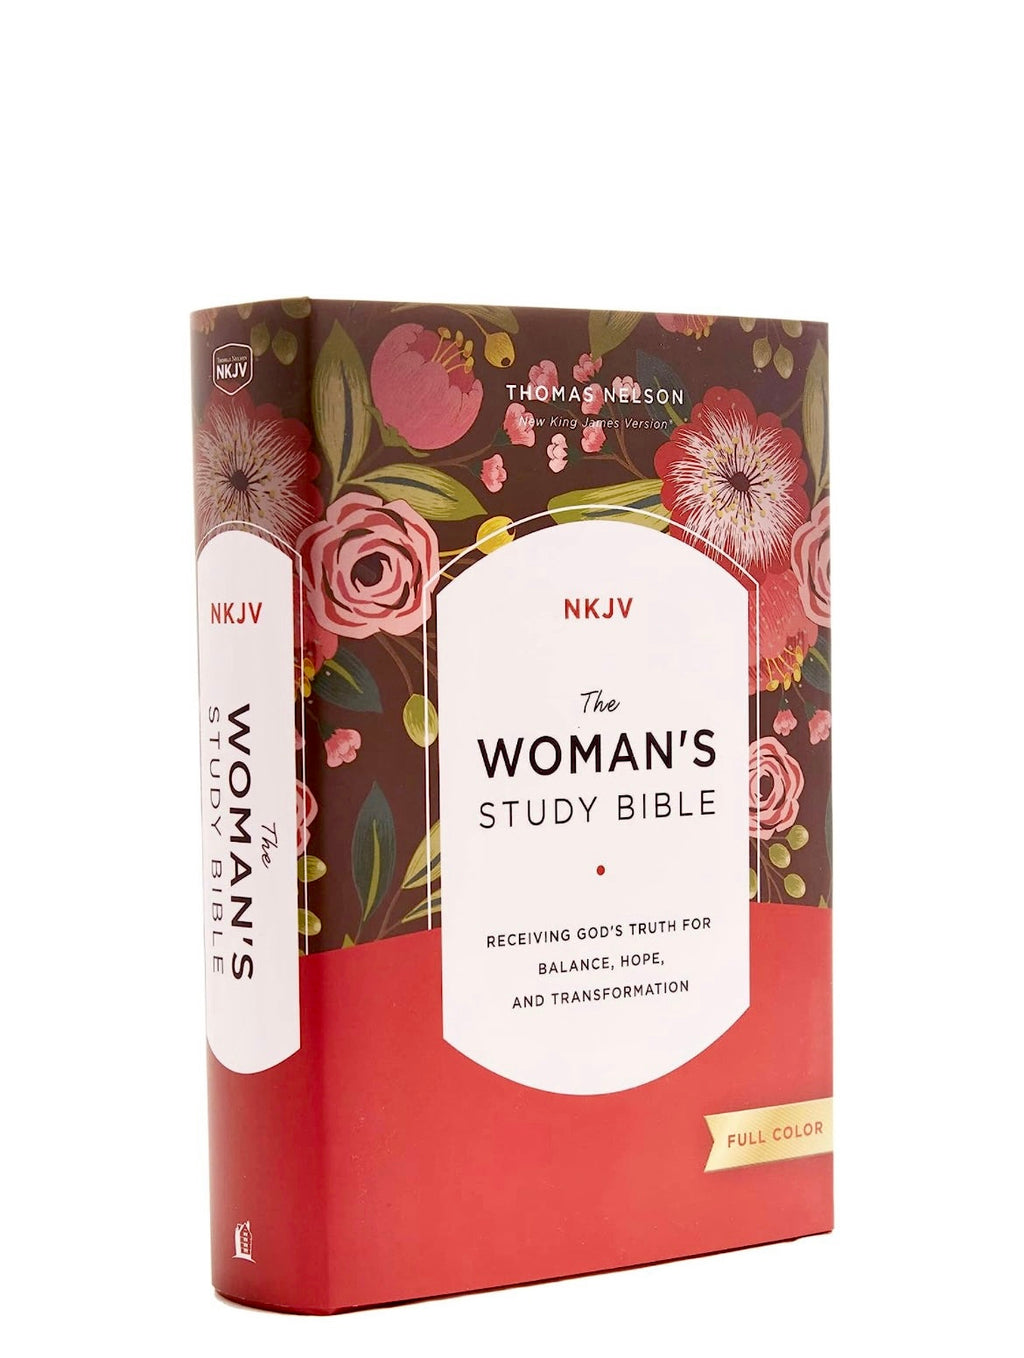 NKJV Woman's Study Bible-Hardcover - I AM INTENTIONAL 